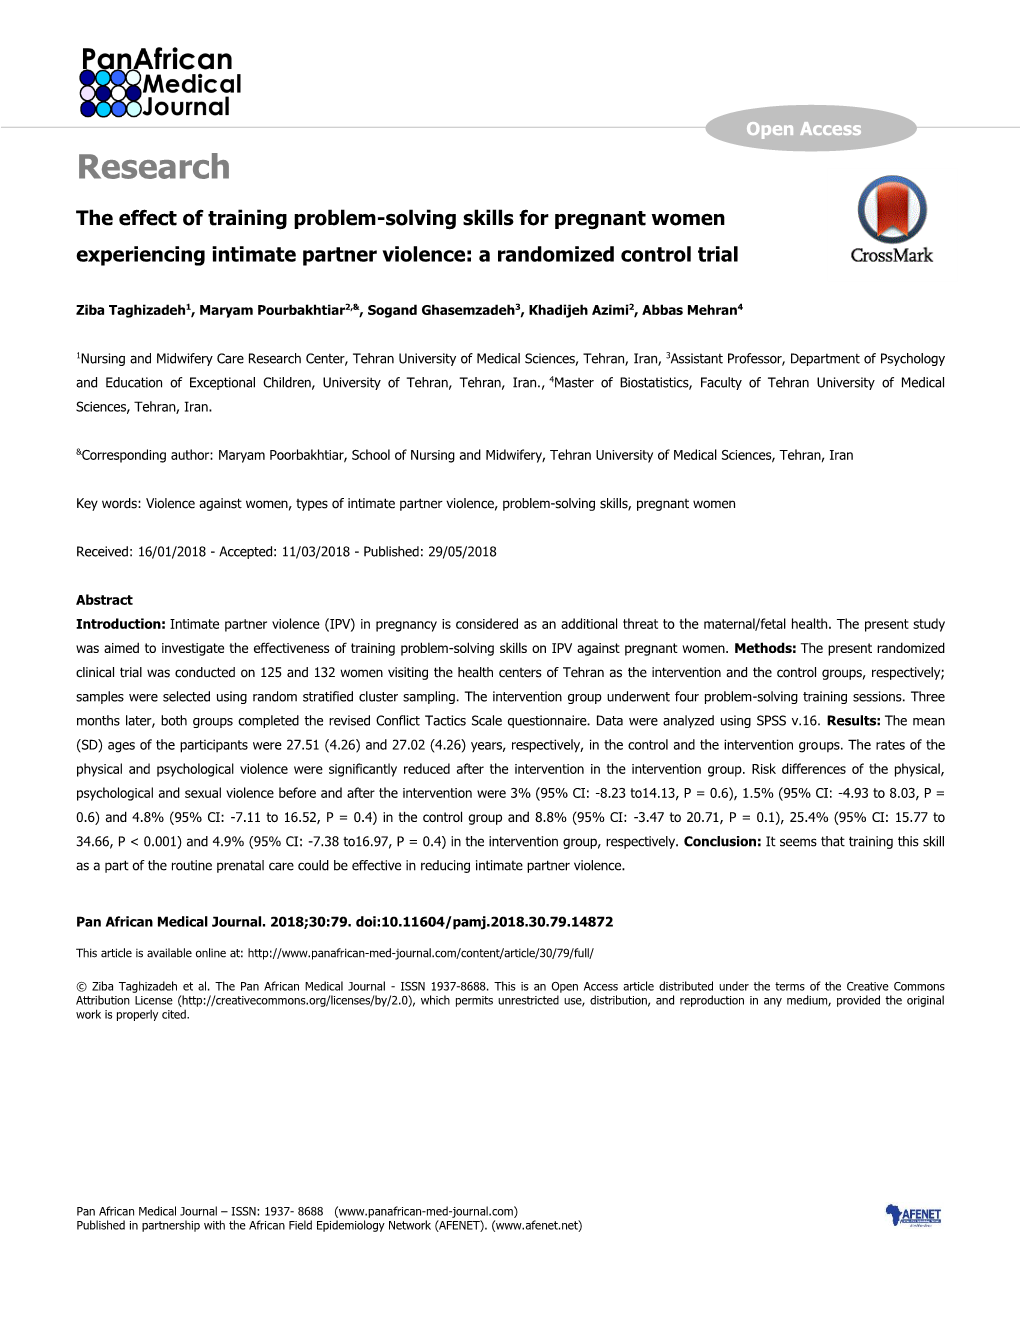 Research the Effect of Training Problem-Solving Skills for Pregnant Women Experiencing Intimate Partner Violence: a Randomized Control Trial